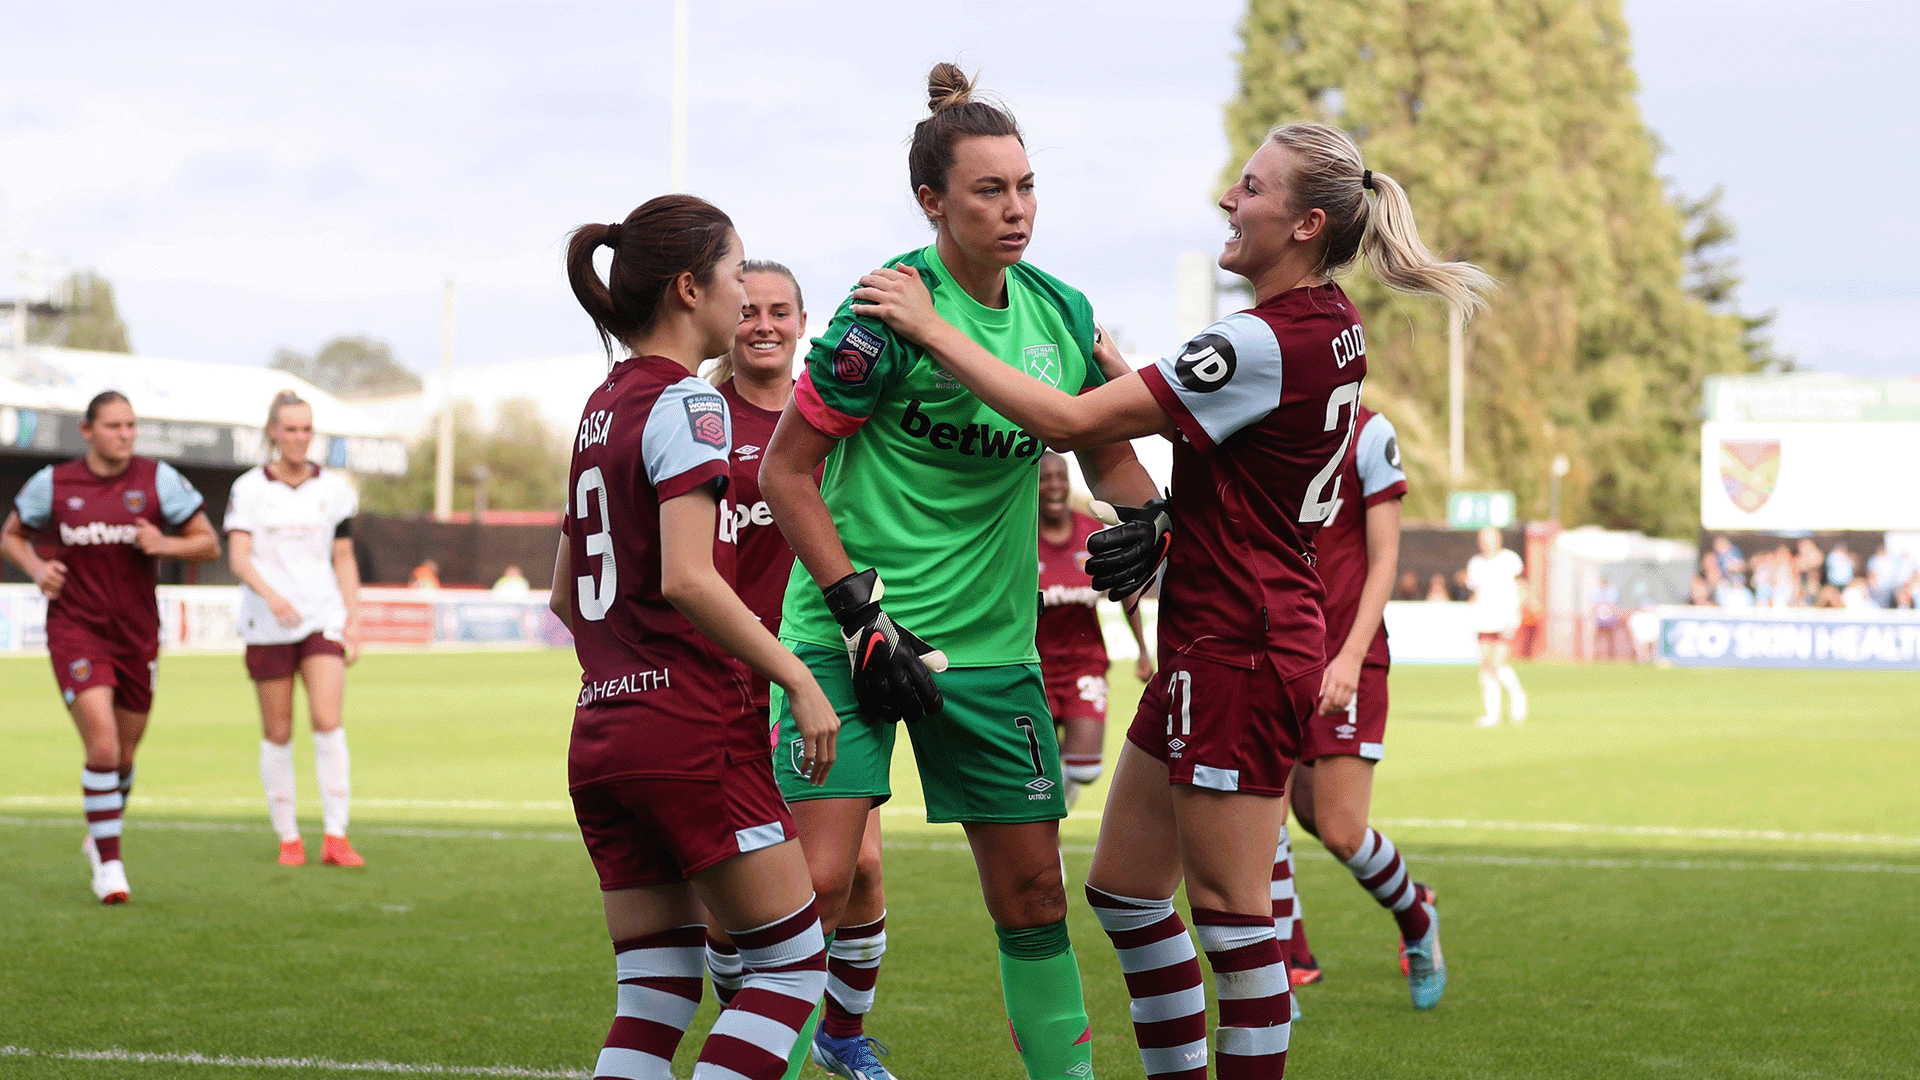 West Ham goalkeeper Mackenzie Arnold celebrates with her team mates after saving a penalty. (Photo: Jacques Feeney / Offside.)